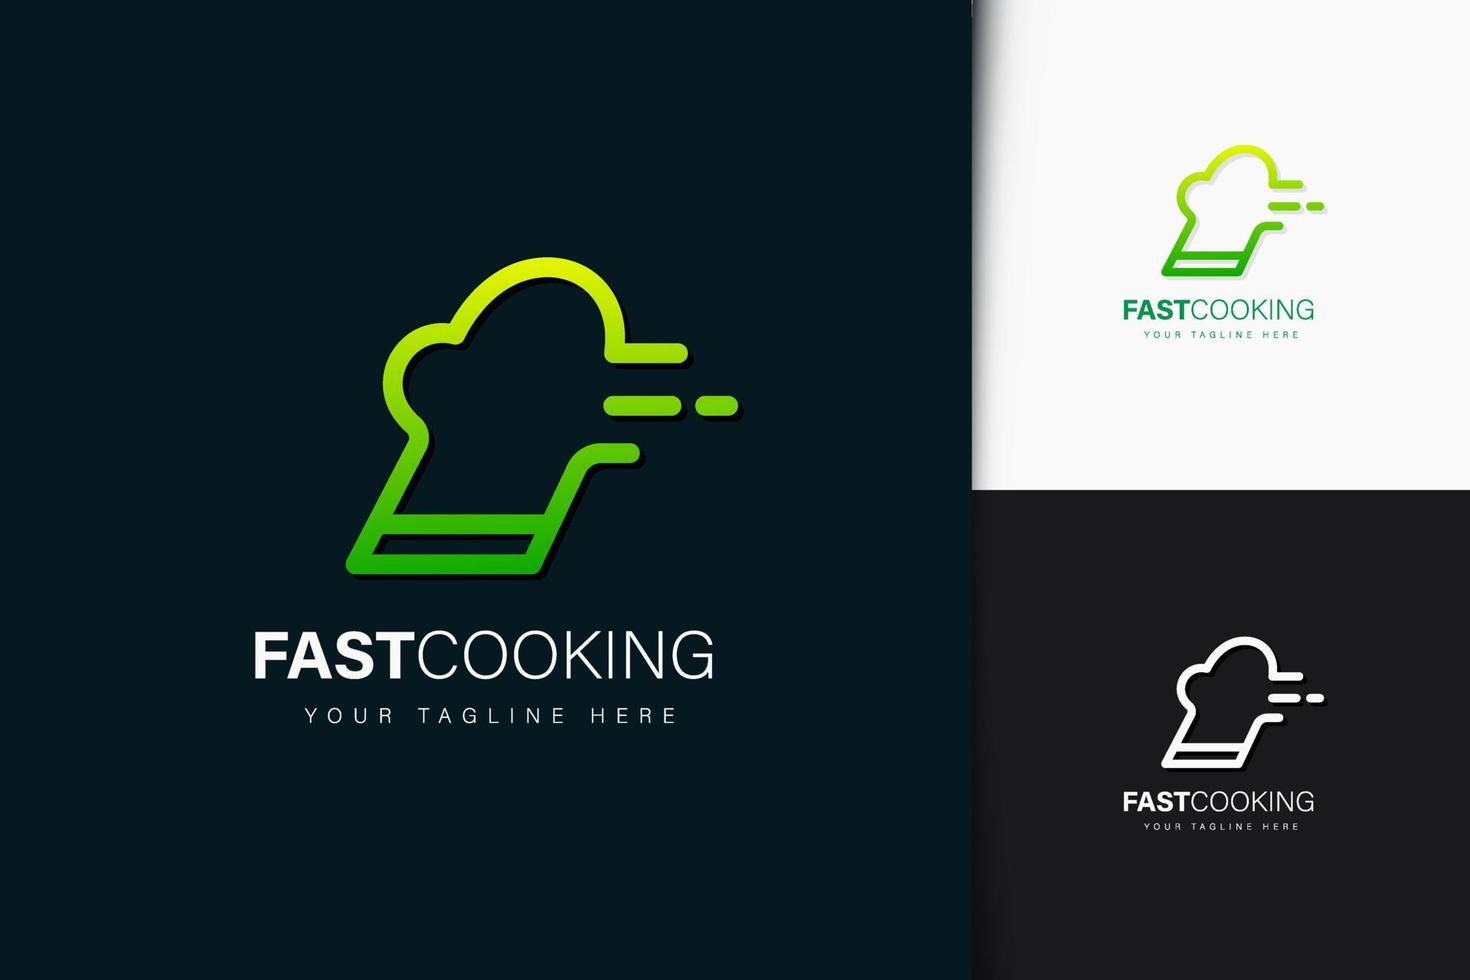 Fast cooking logo design with gradient vector